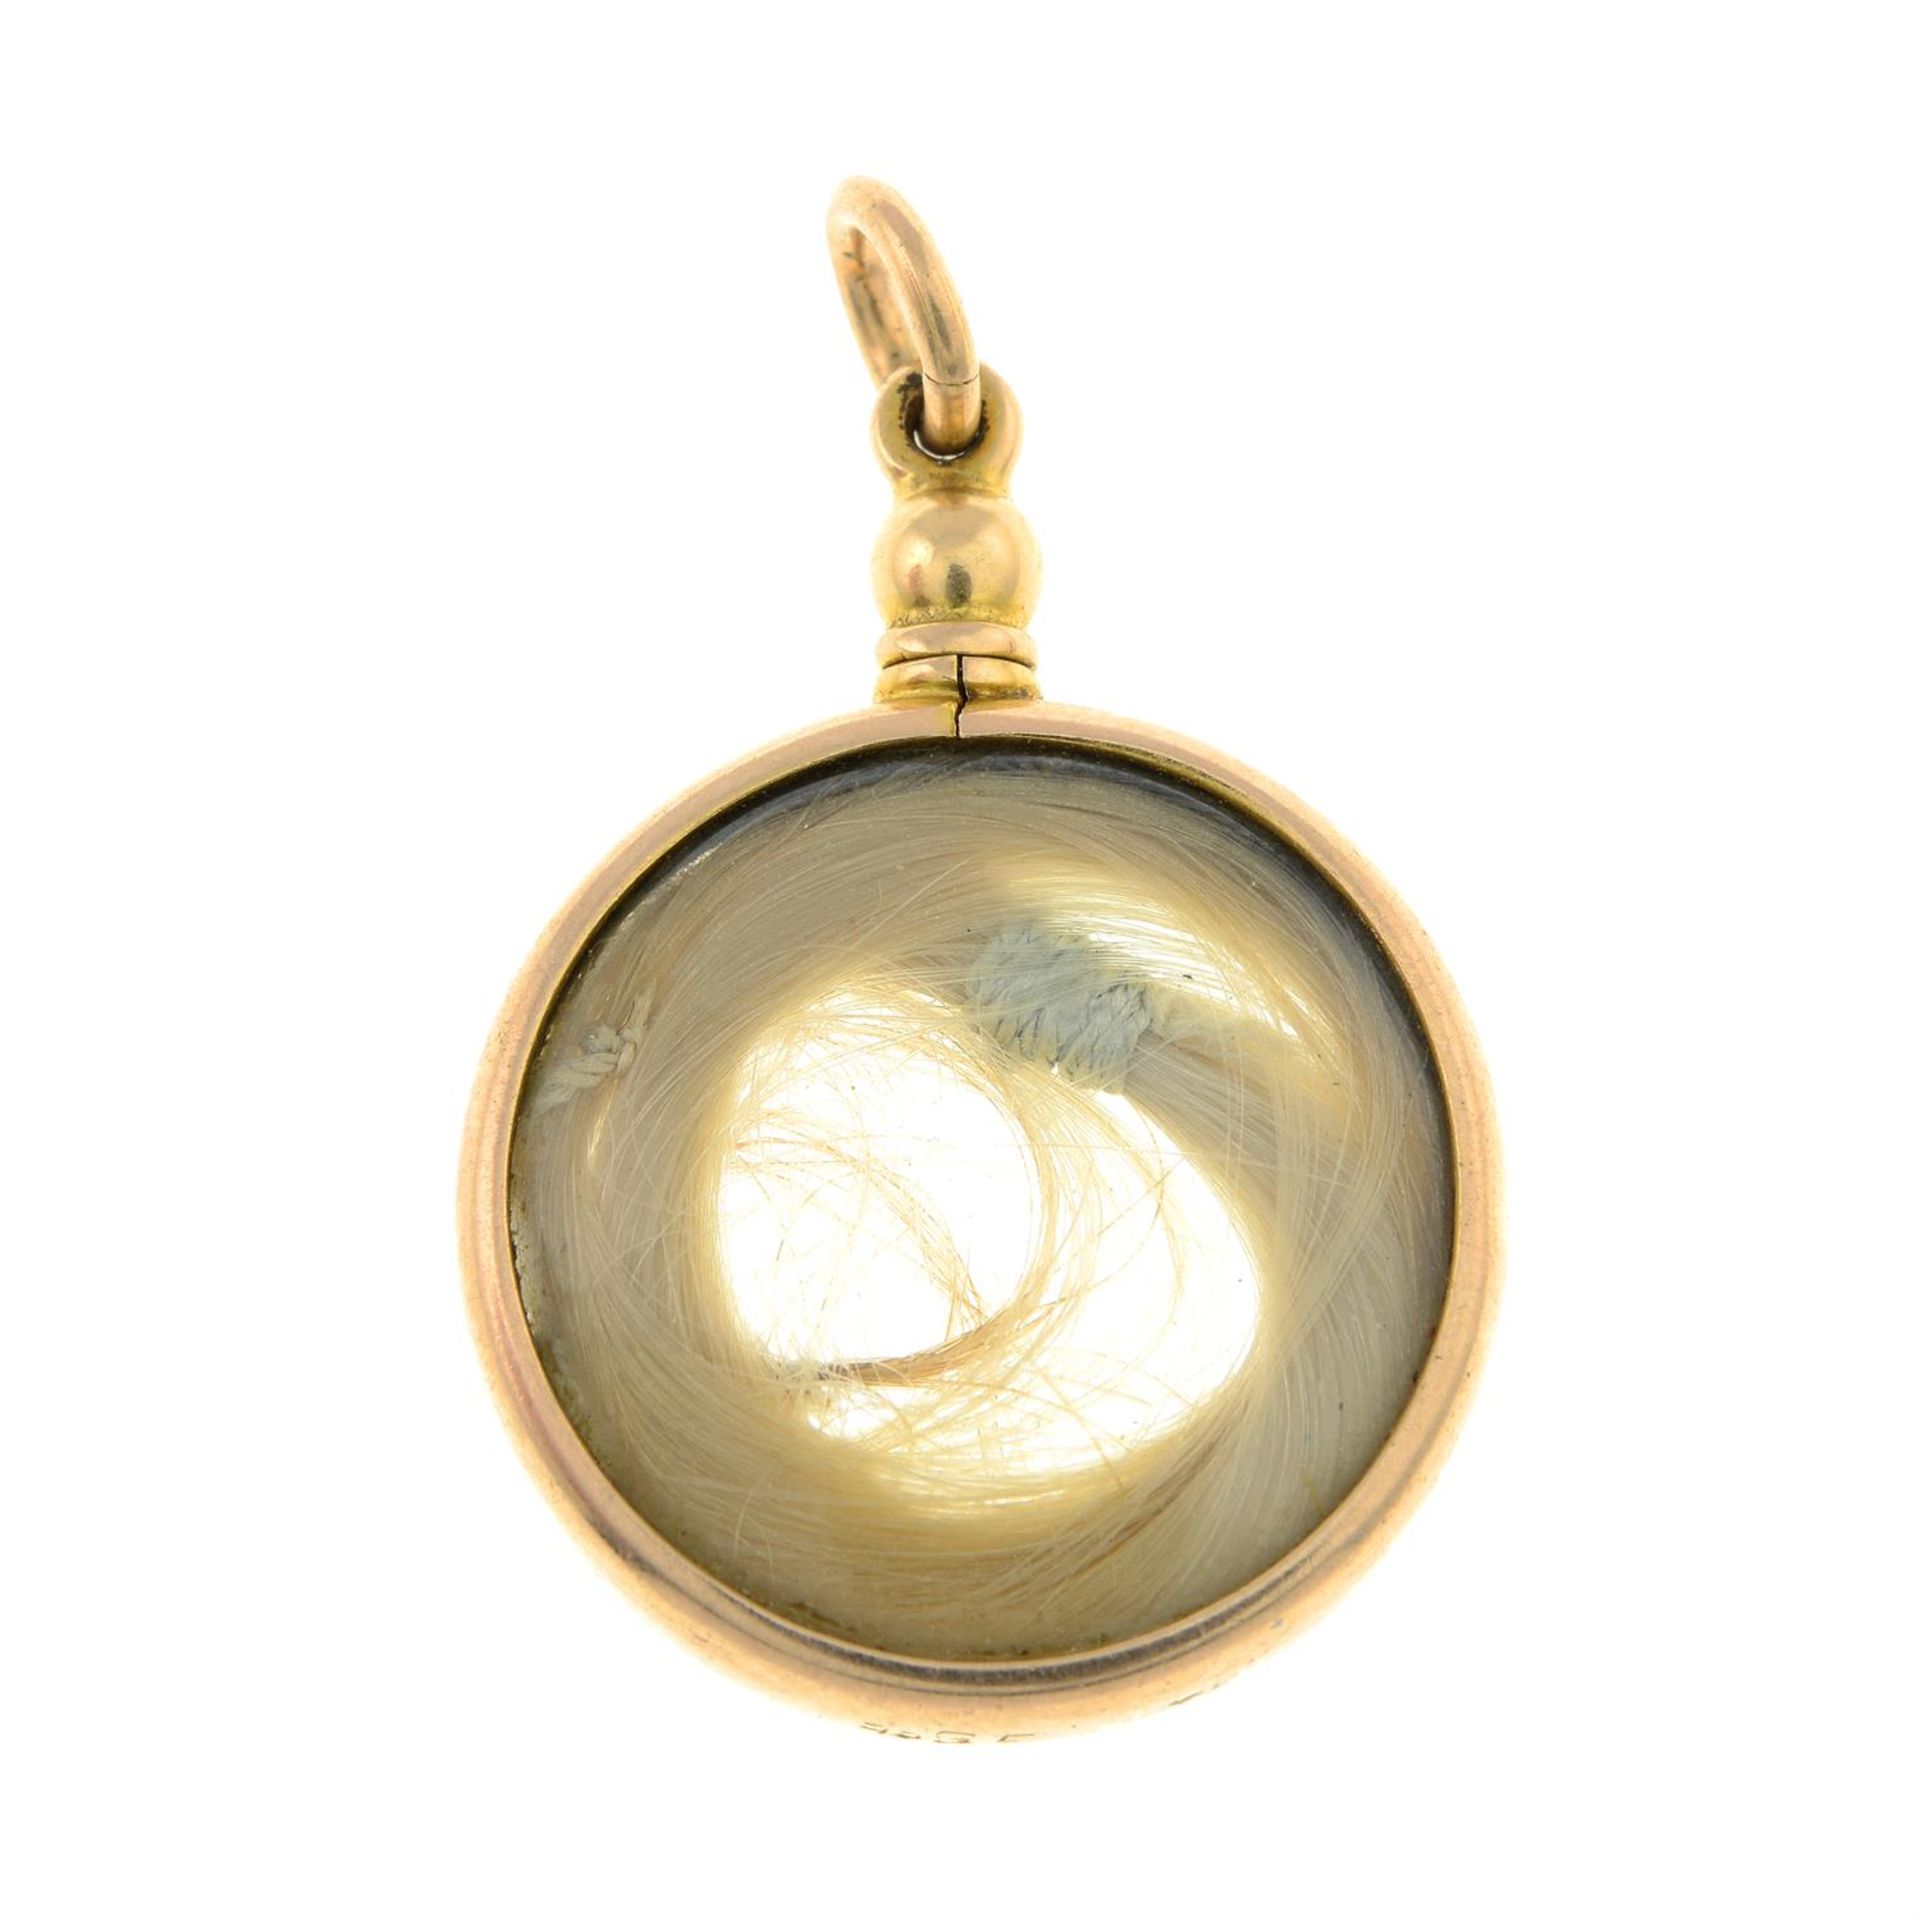 An early 20th century 15ct gold locket, containing a lock of hair. - Image 2 of 2